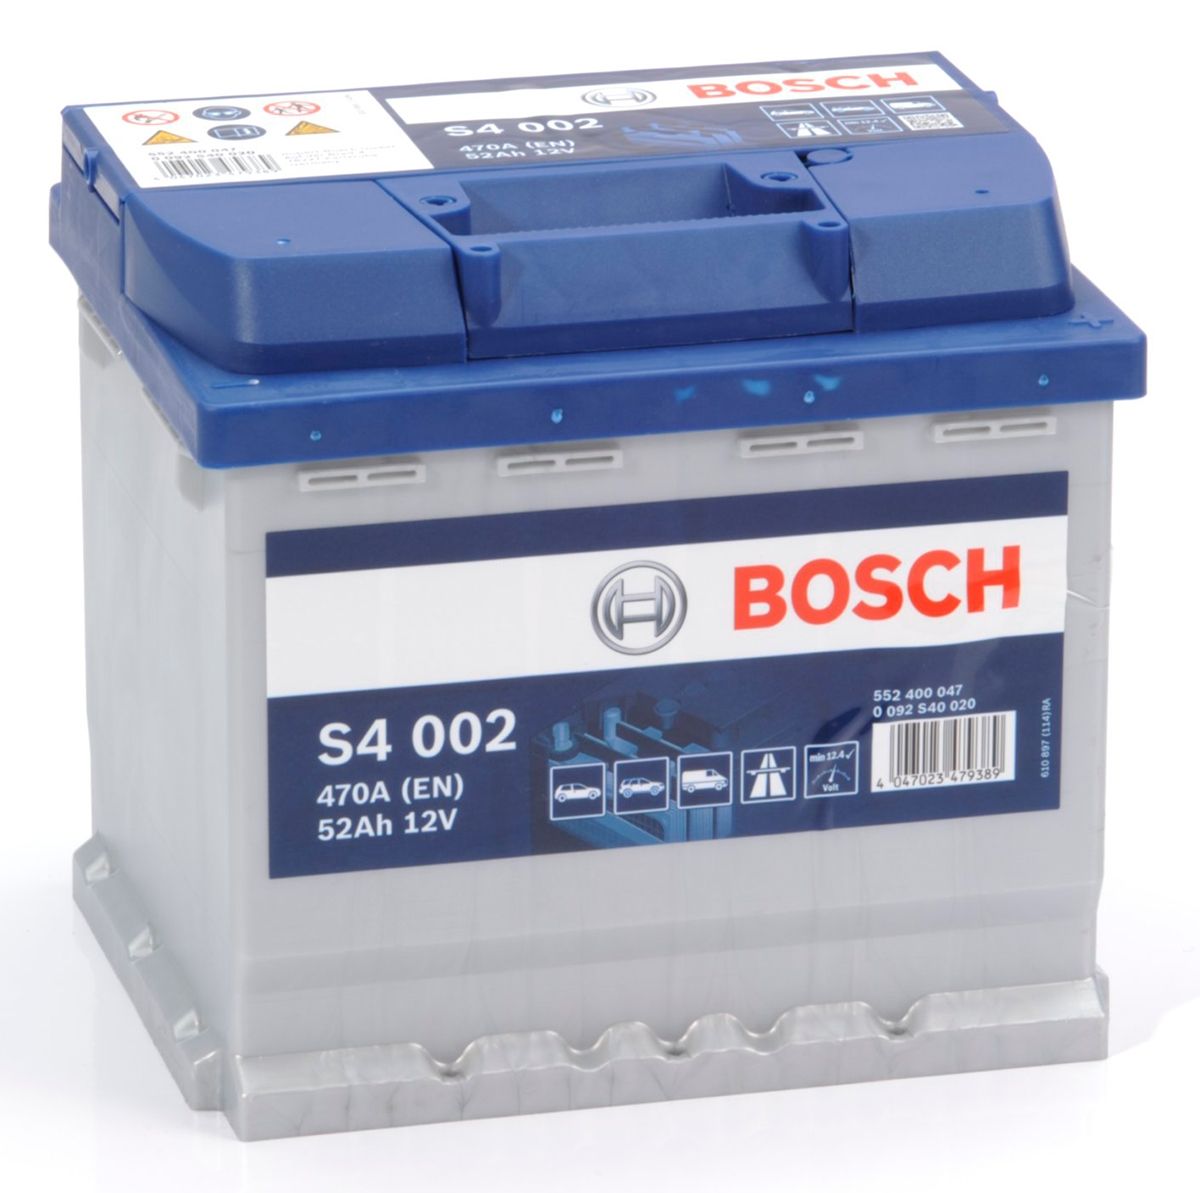 Reviews S4 002 Bosch Car Battery 12v 52ah Type 079 S4002 Page 1